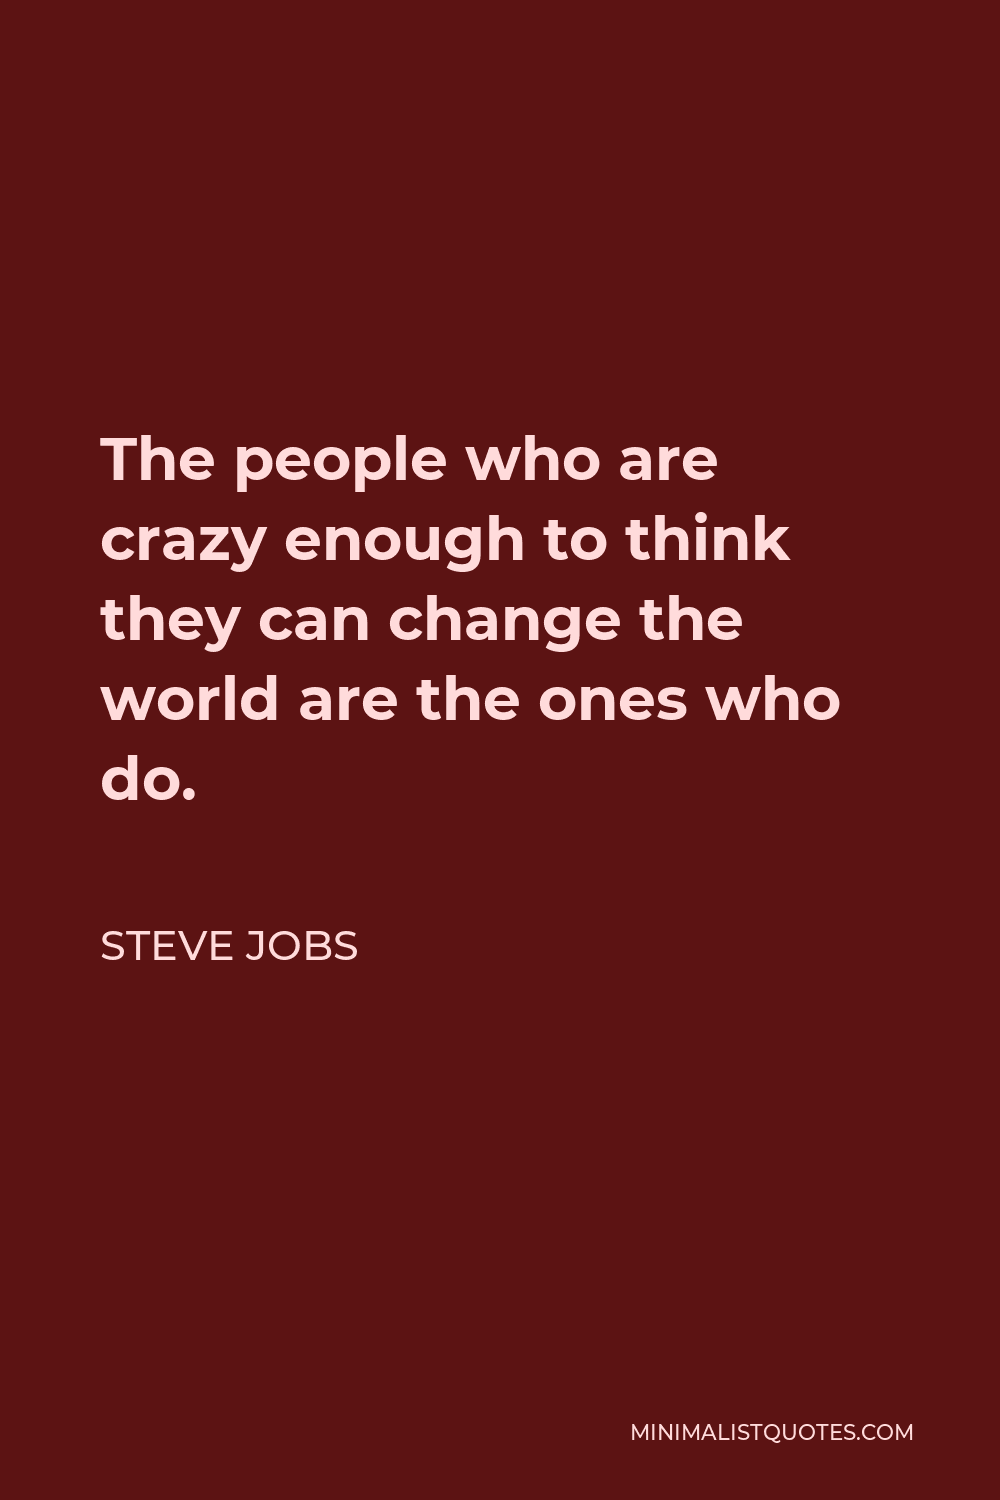 Steve Jobs Quote - The people who are crazy enough to think they can change the world are the ones who do.